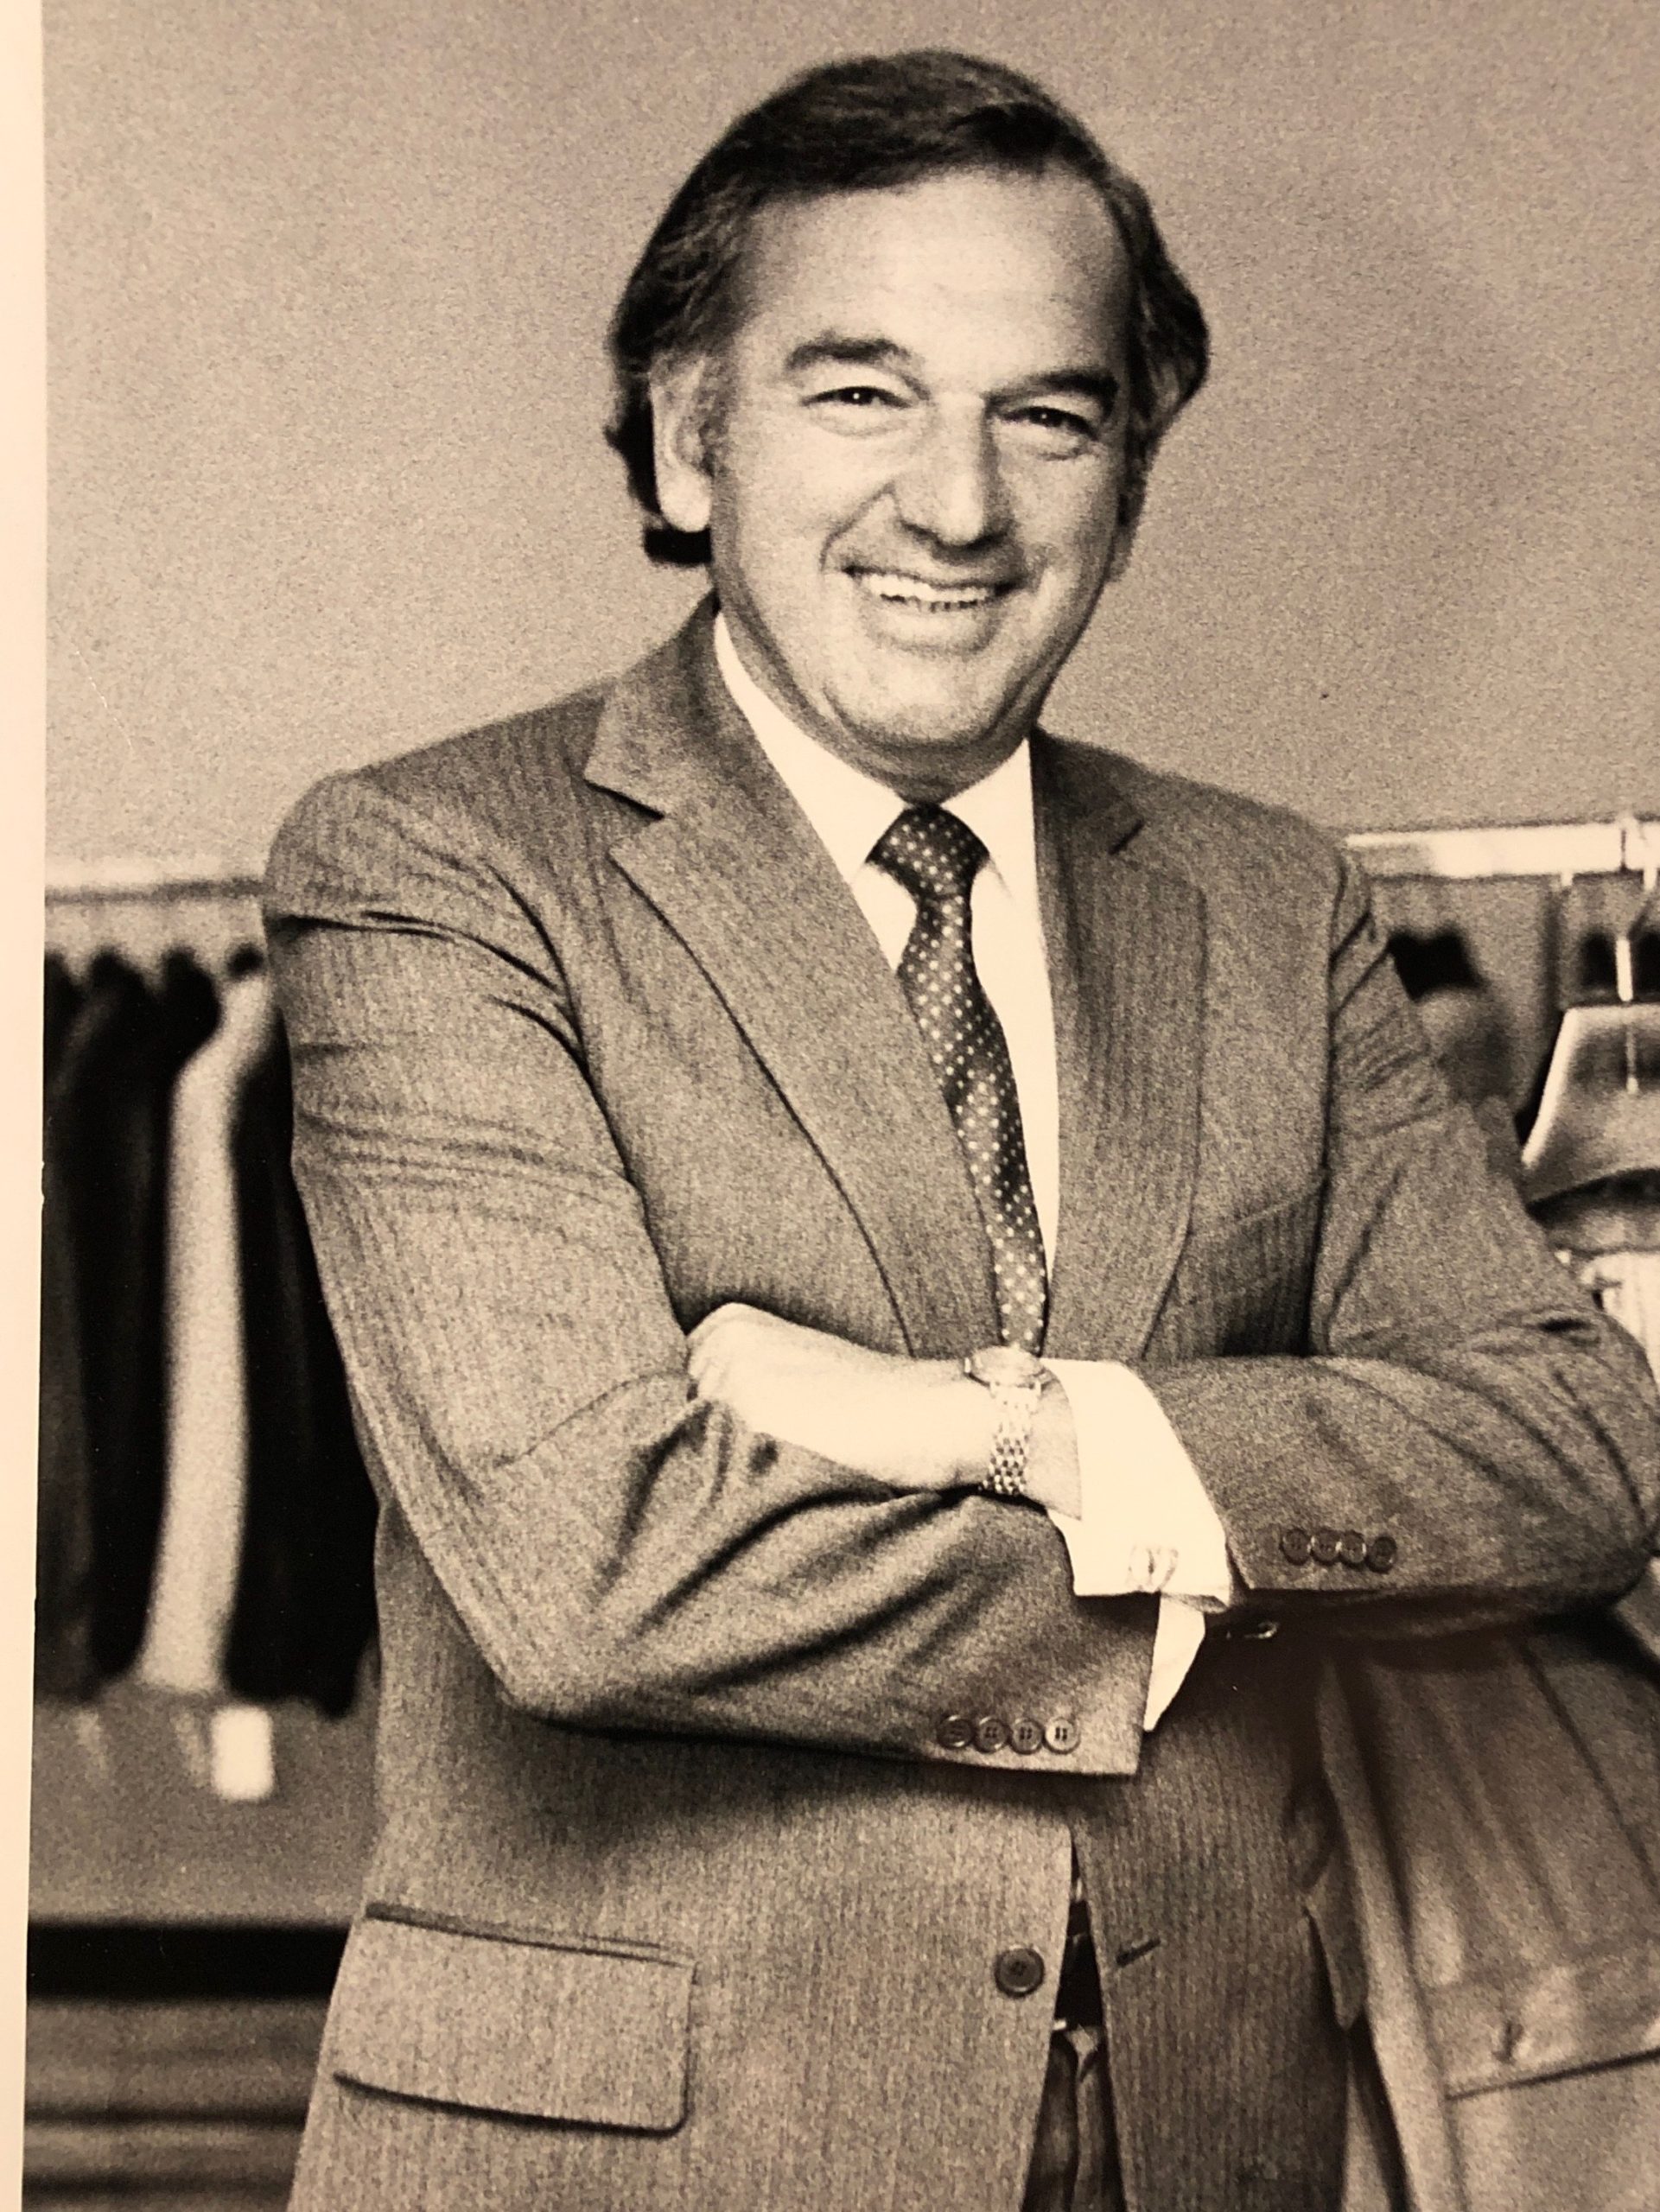 Irving Spitalnick, a fashion entrepreneur, family man and former Great Neck resident, died on July 9 at 88. Many of his family members still reside on the North Shore. (Photo courtesy of the Spitalnick family)